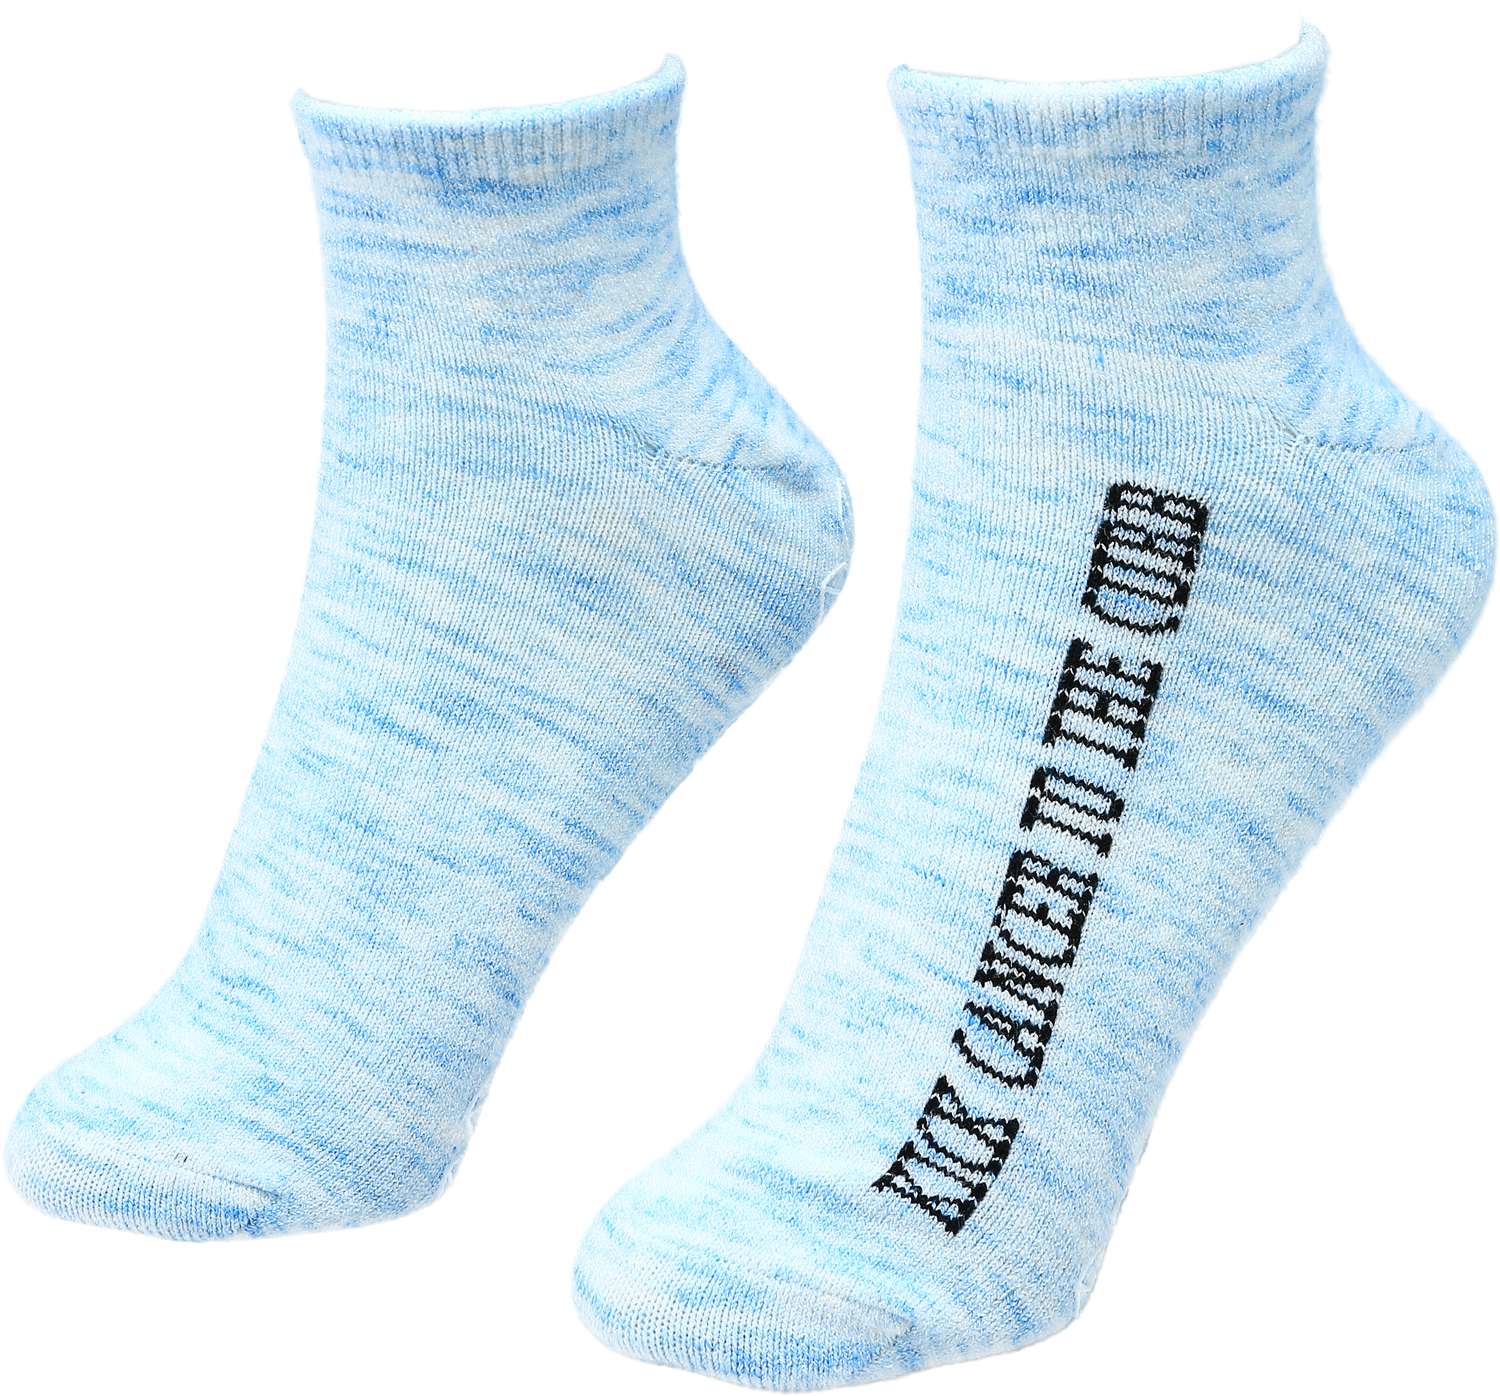 Kick Cancer by Faith Hope and Healing - Kick Cancer - Low Cut, Moisturizing Gel Socks
Scent: Light Lavender